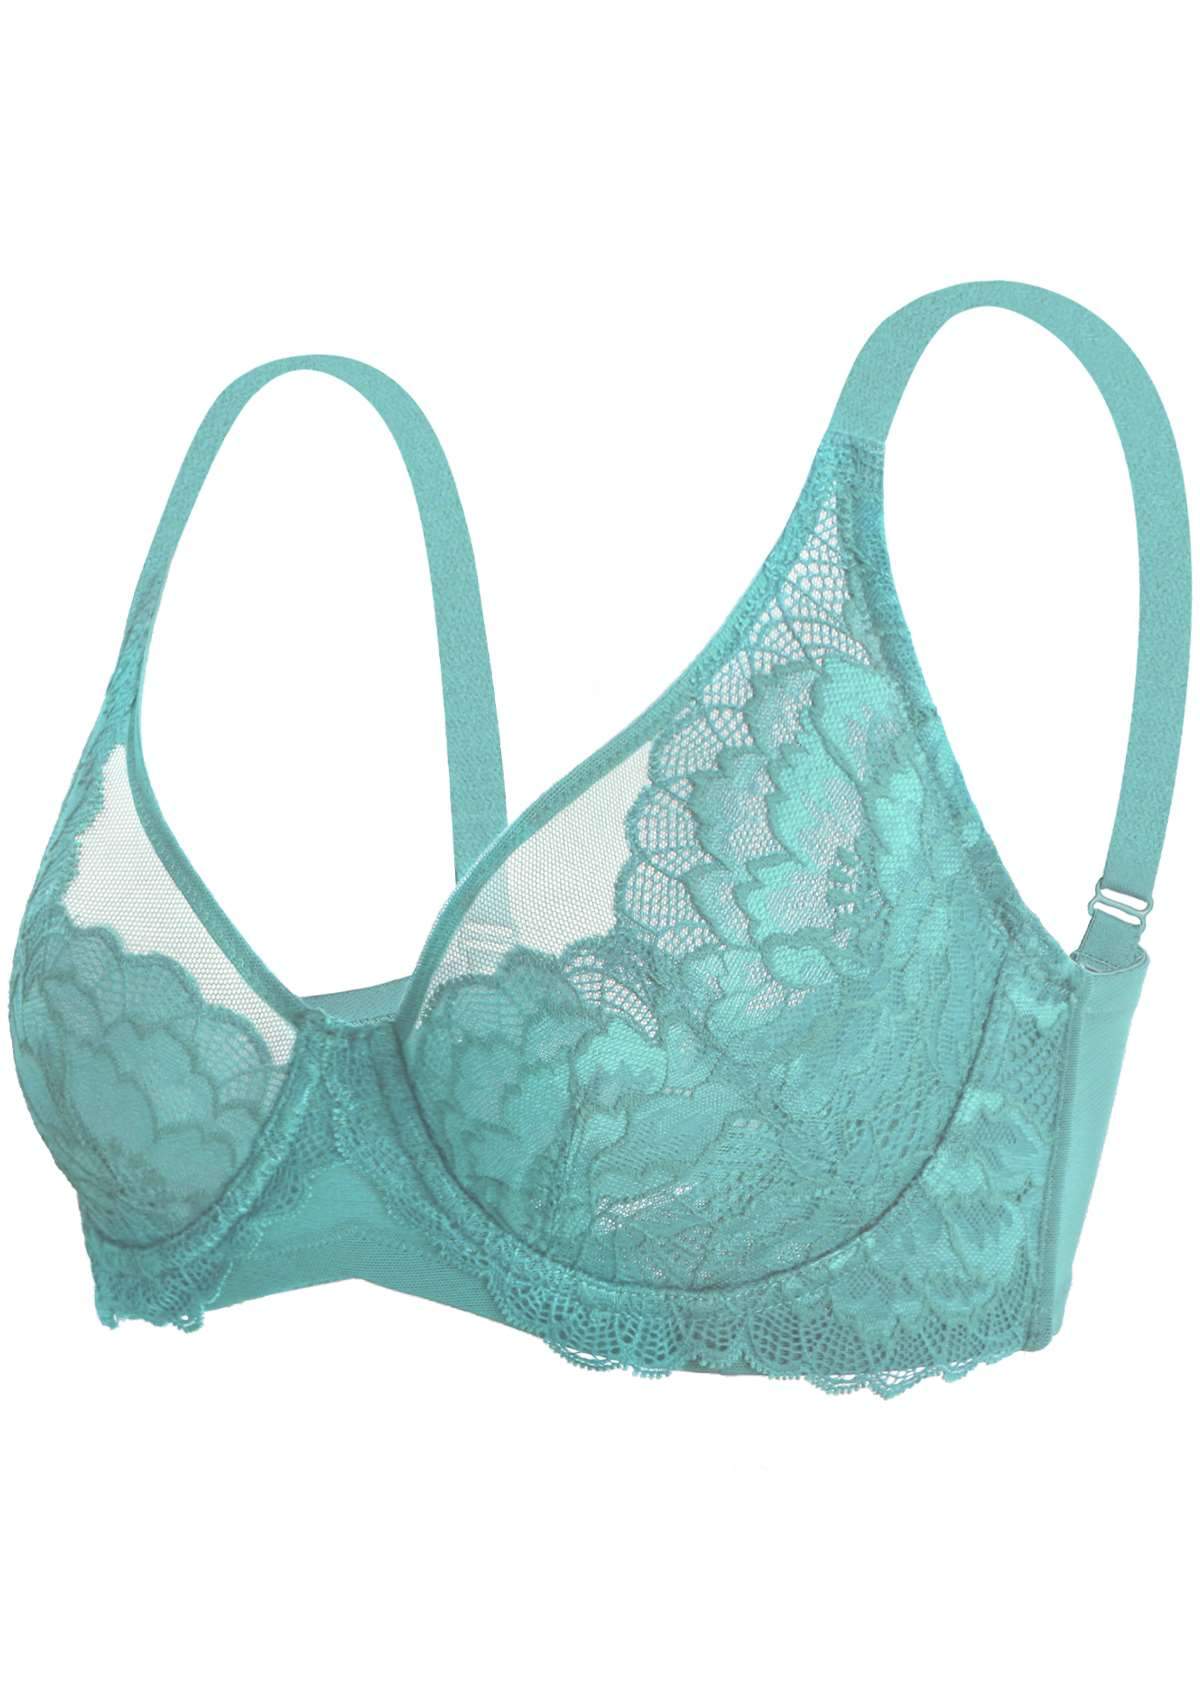 HSIA Paeonia Lace Full Coverage Underwire Non-Padded Uplifting Bra - Teal / 38 / C